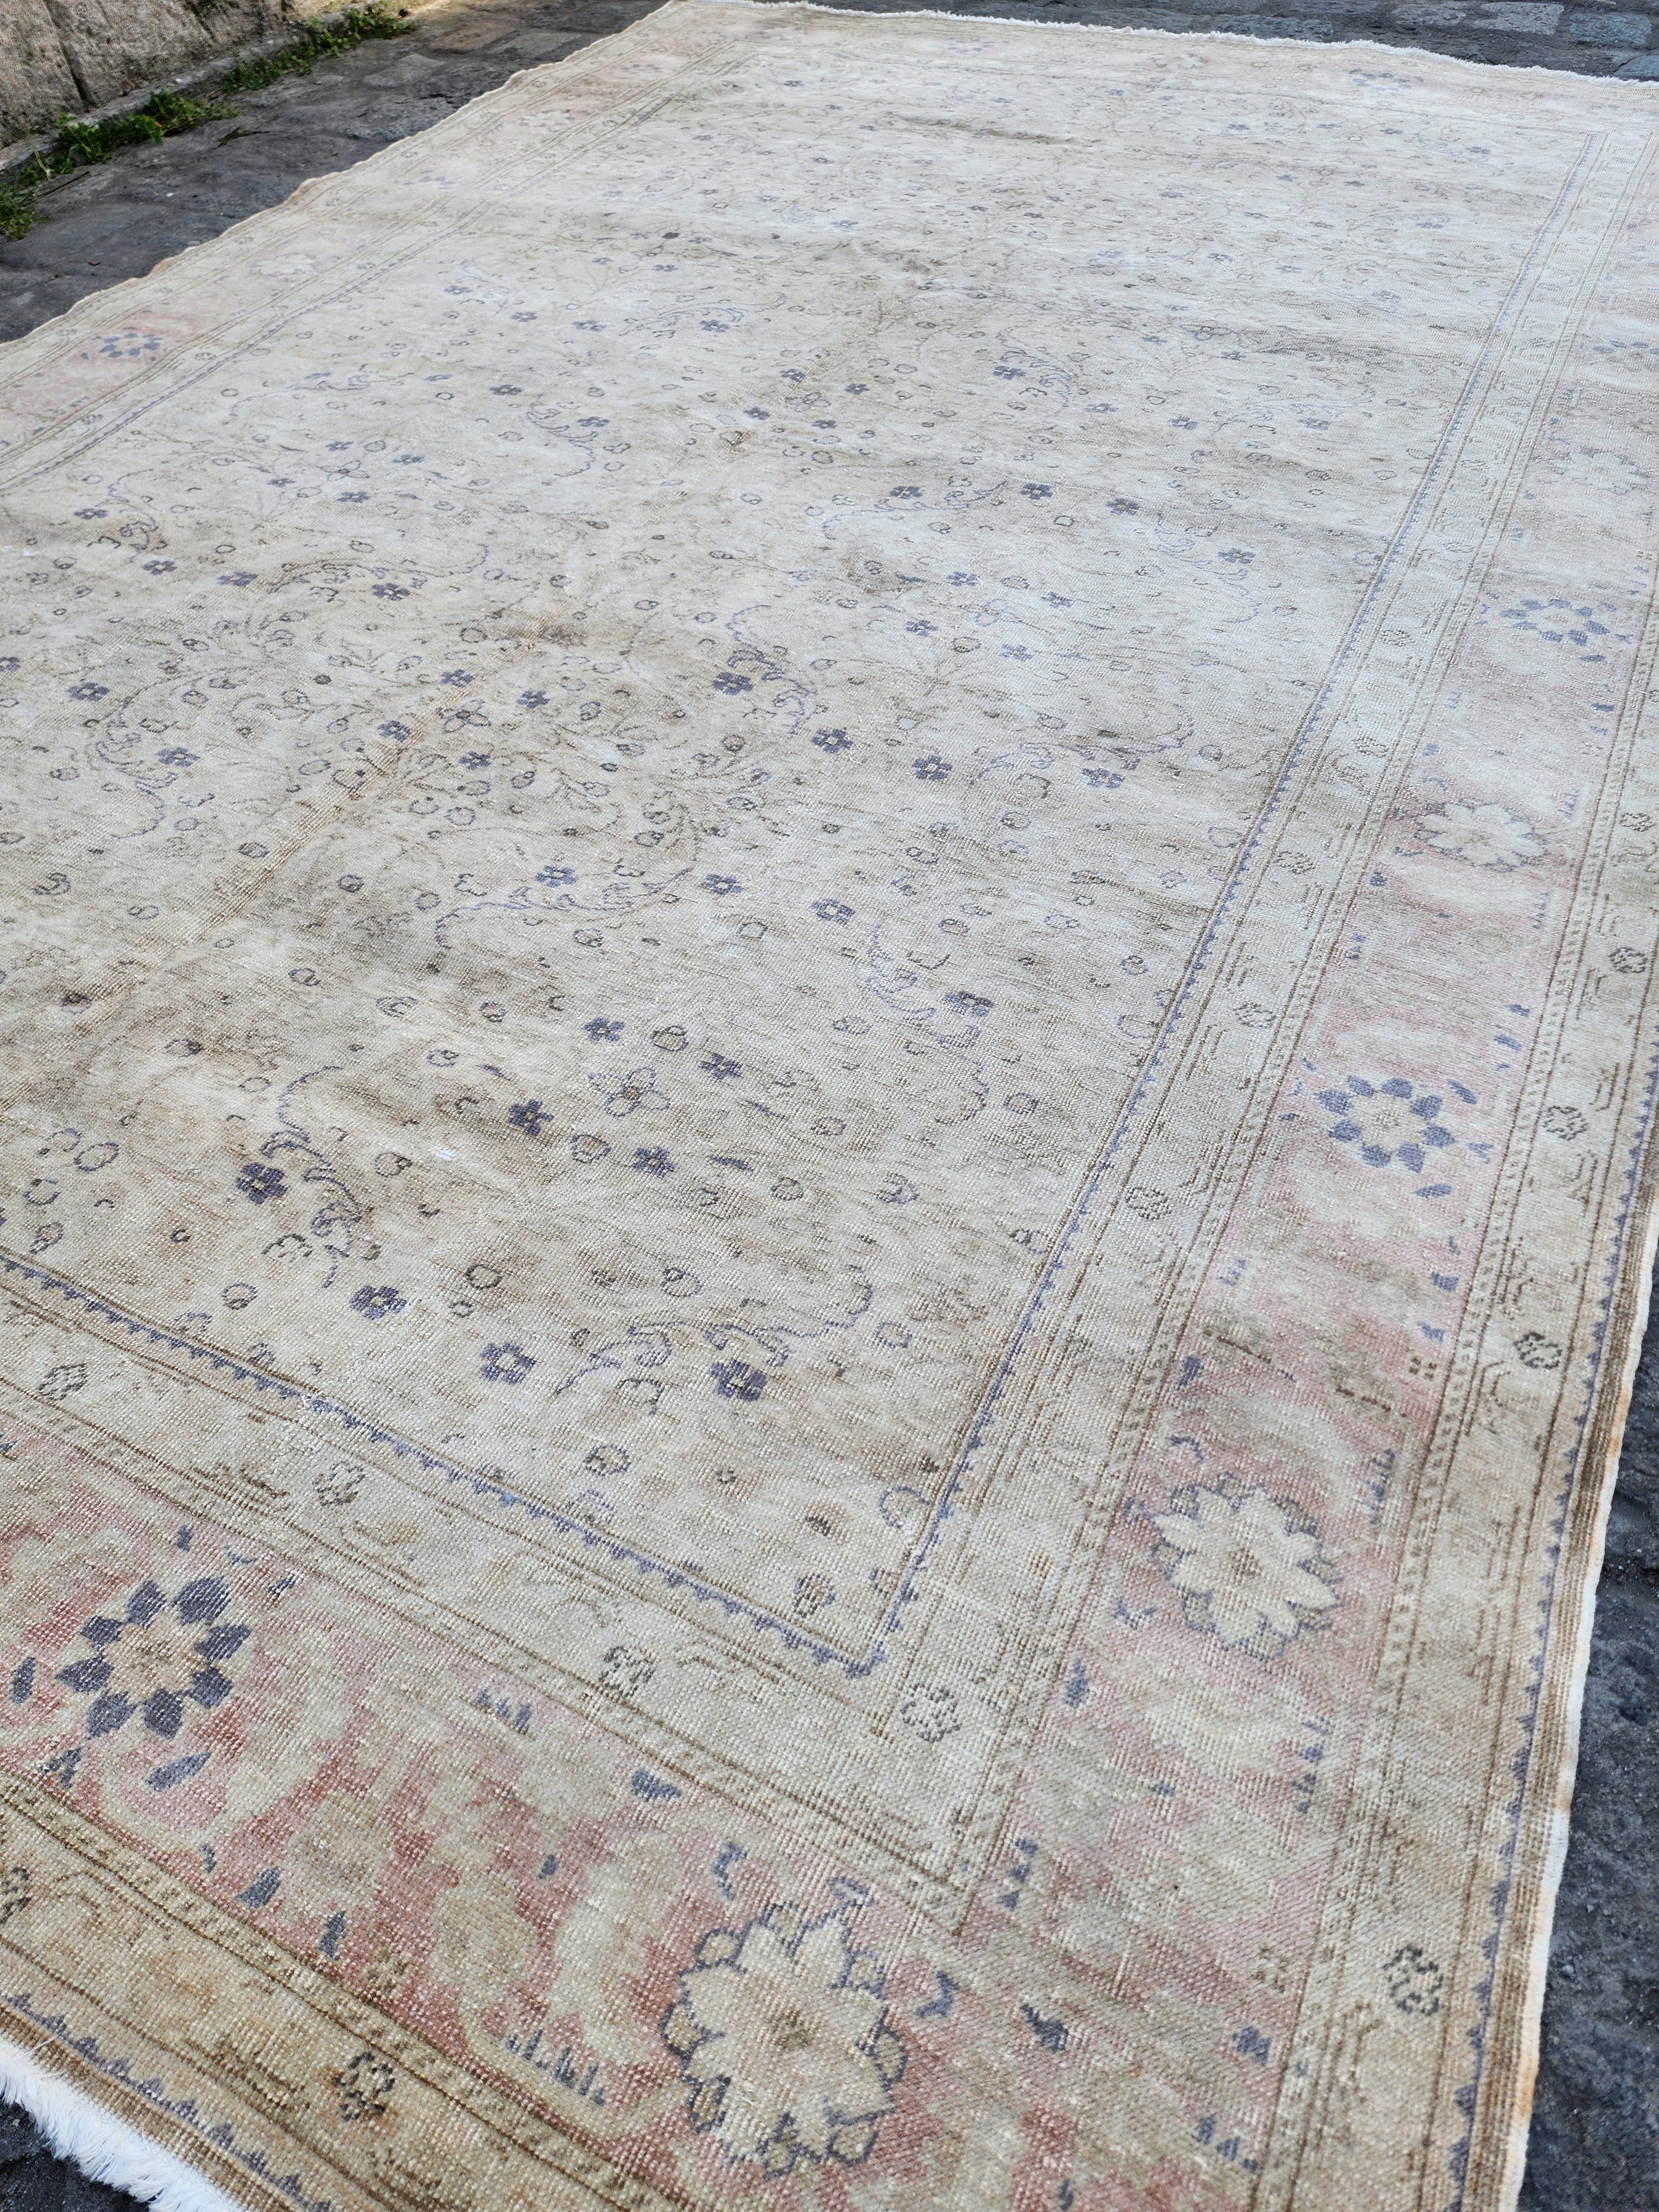 Pastel Turkish Rug 9 x 6 ft Vintage Antique Muted Pink Blue Overdyed Rug, Distressed Pale Oushak Rug Handmade Natural Wool Persian Area Rug